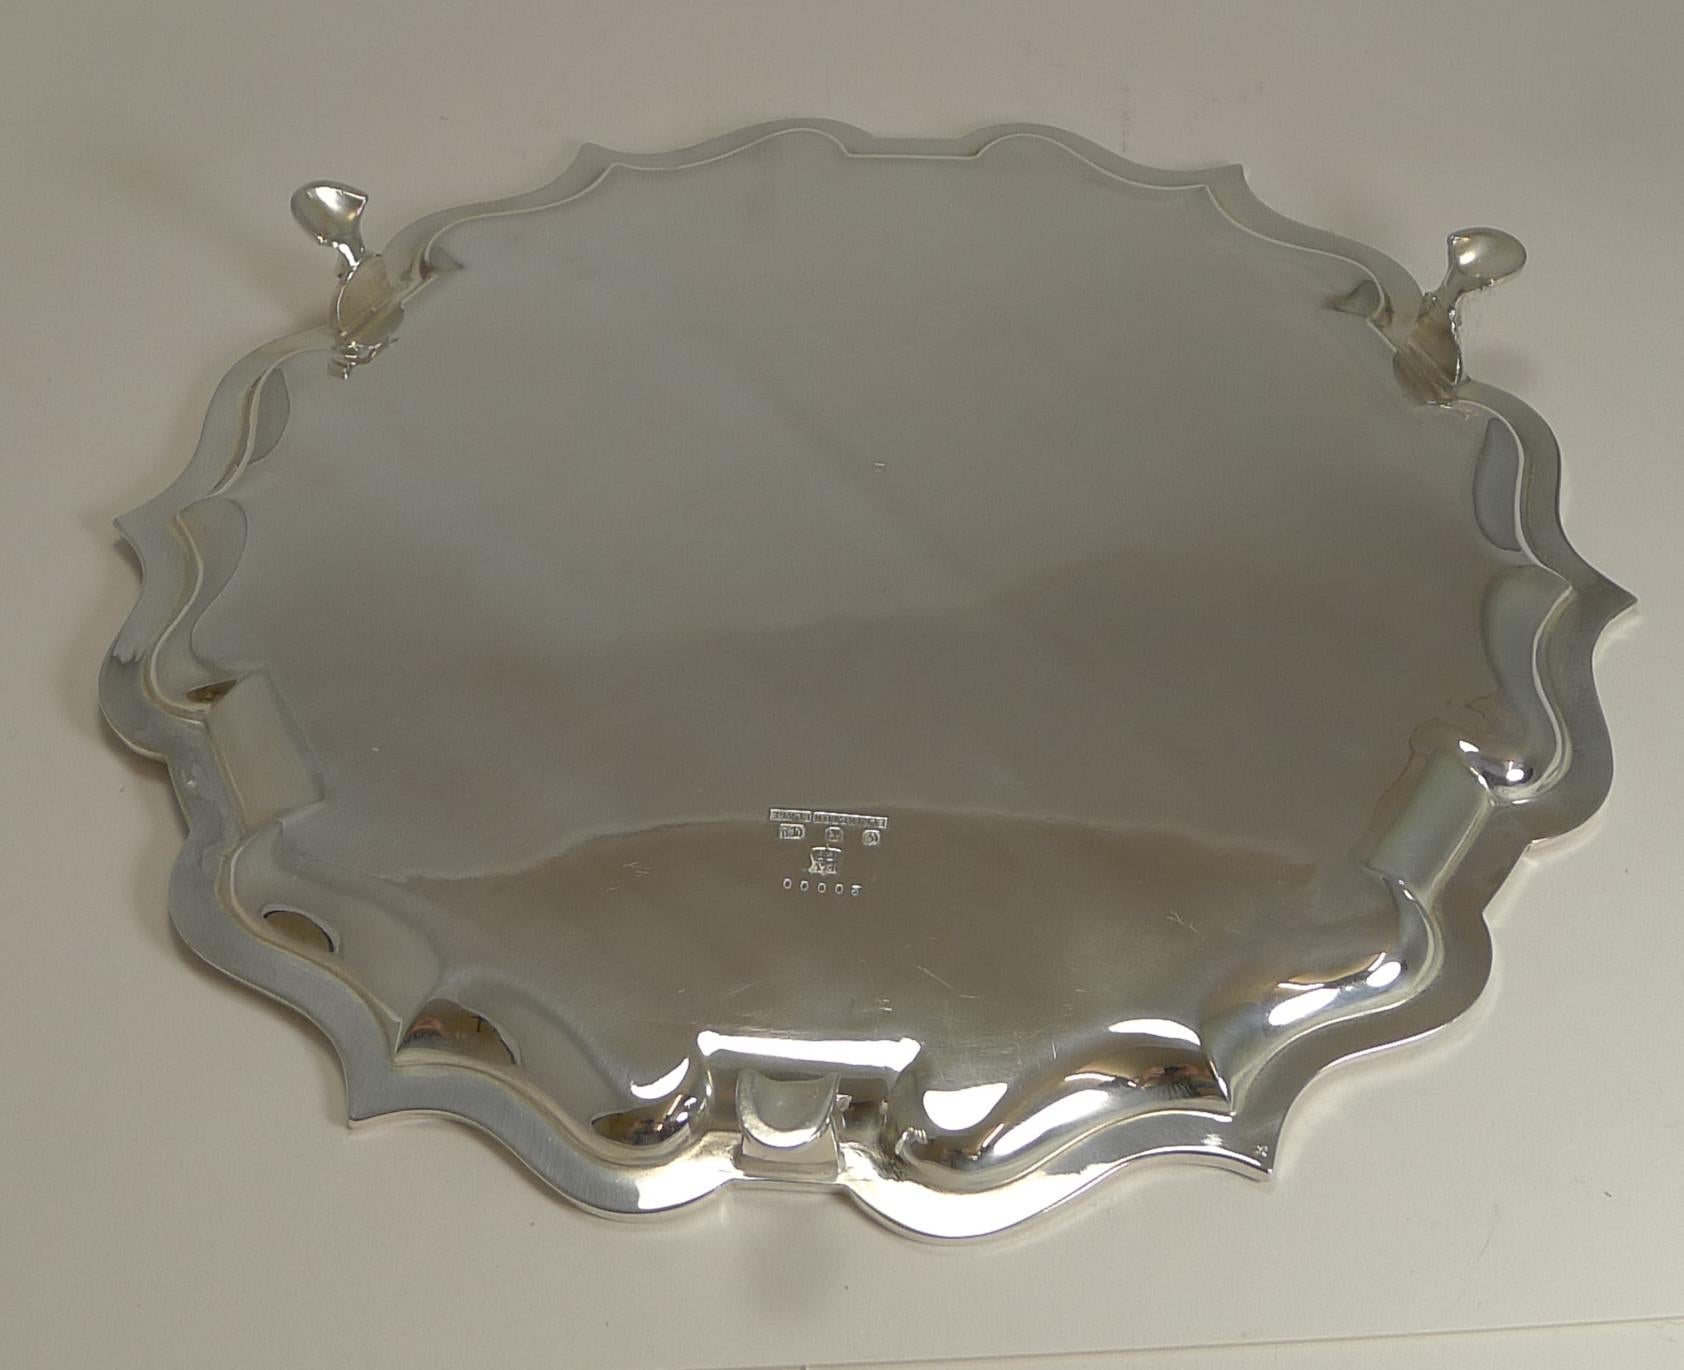 A beautiful and elegant antique English serving salver or drinks tray, beautifully shaped with a plain polished surface and standing on three legs.

The tray is made and fully marked for the top-notch silversmith, Elkington and Co.; being